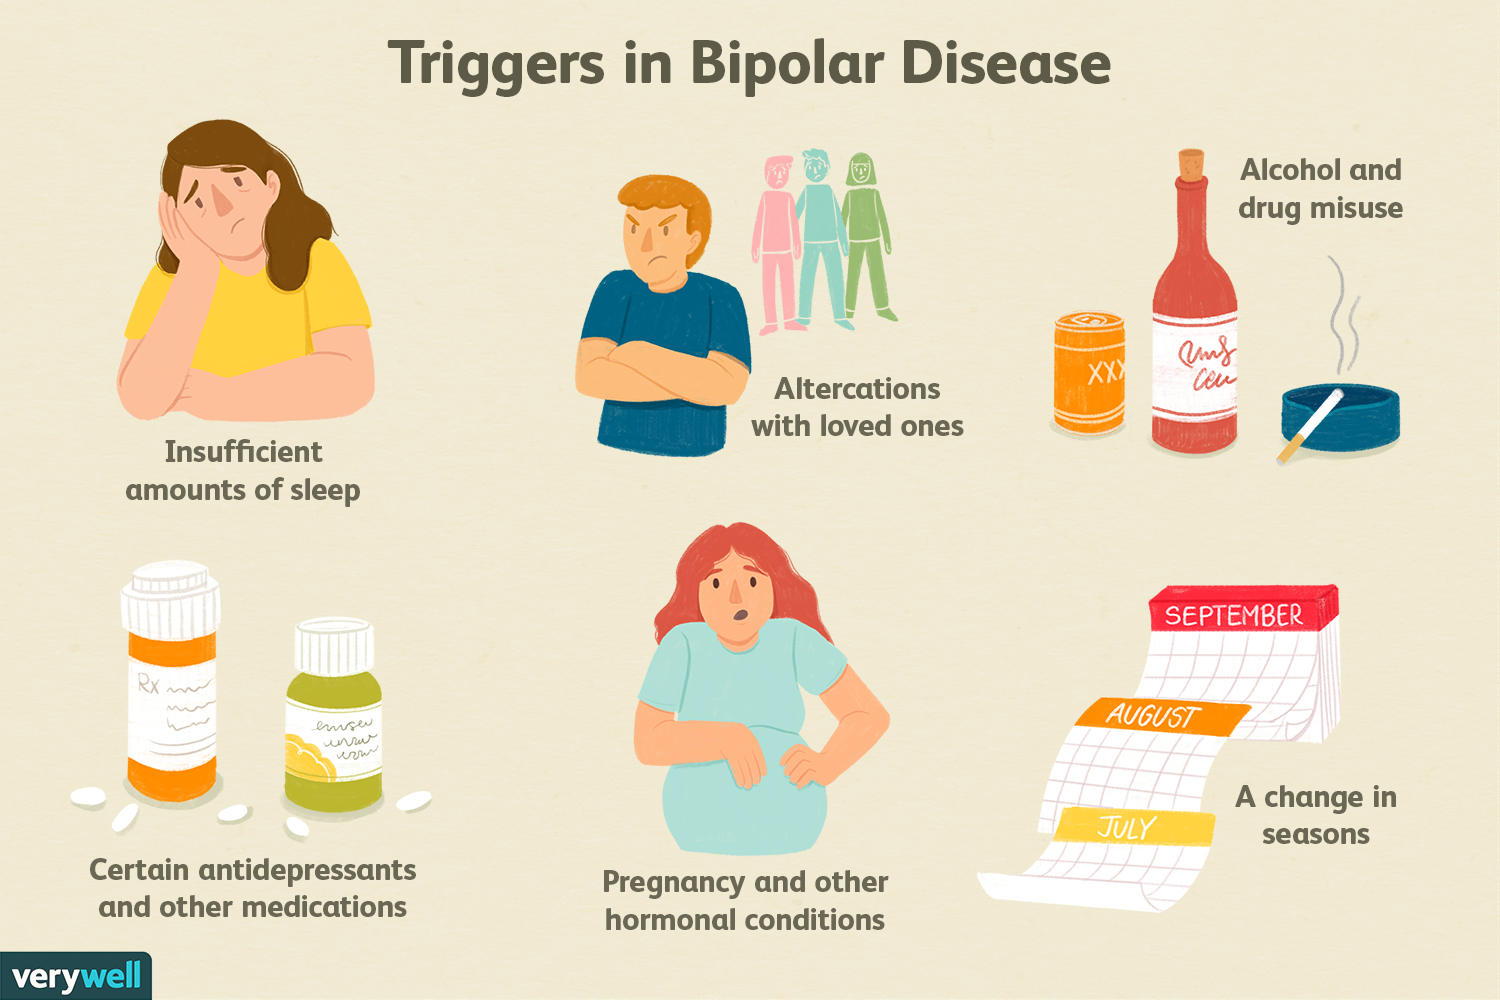 How Often Do People With Bipolar Disorder Cycle?